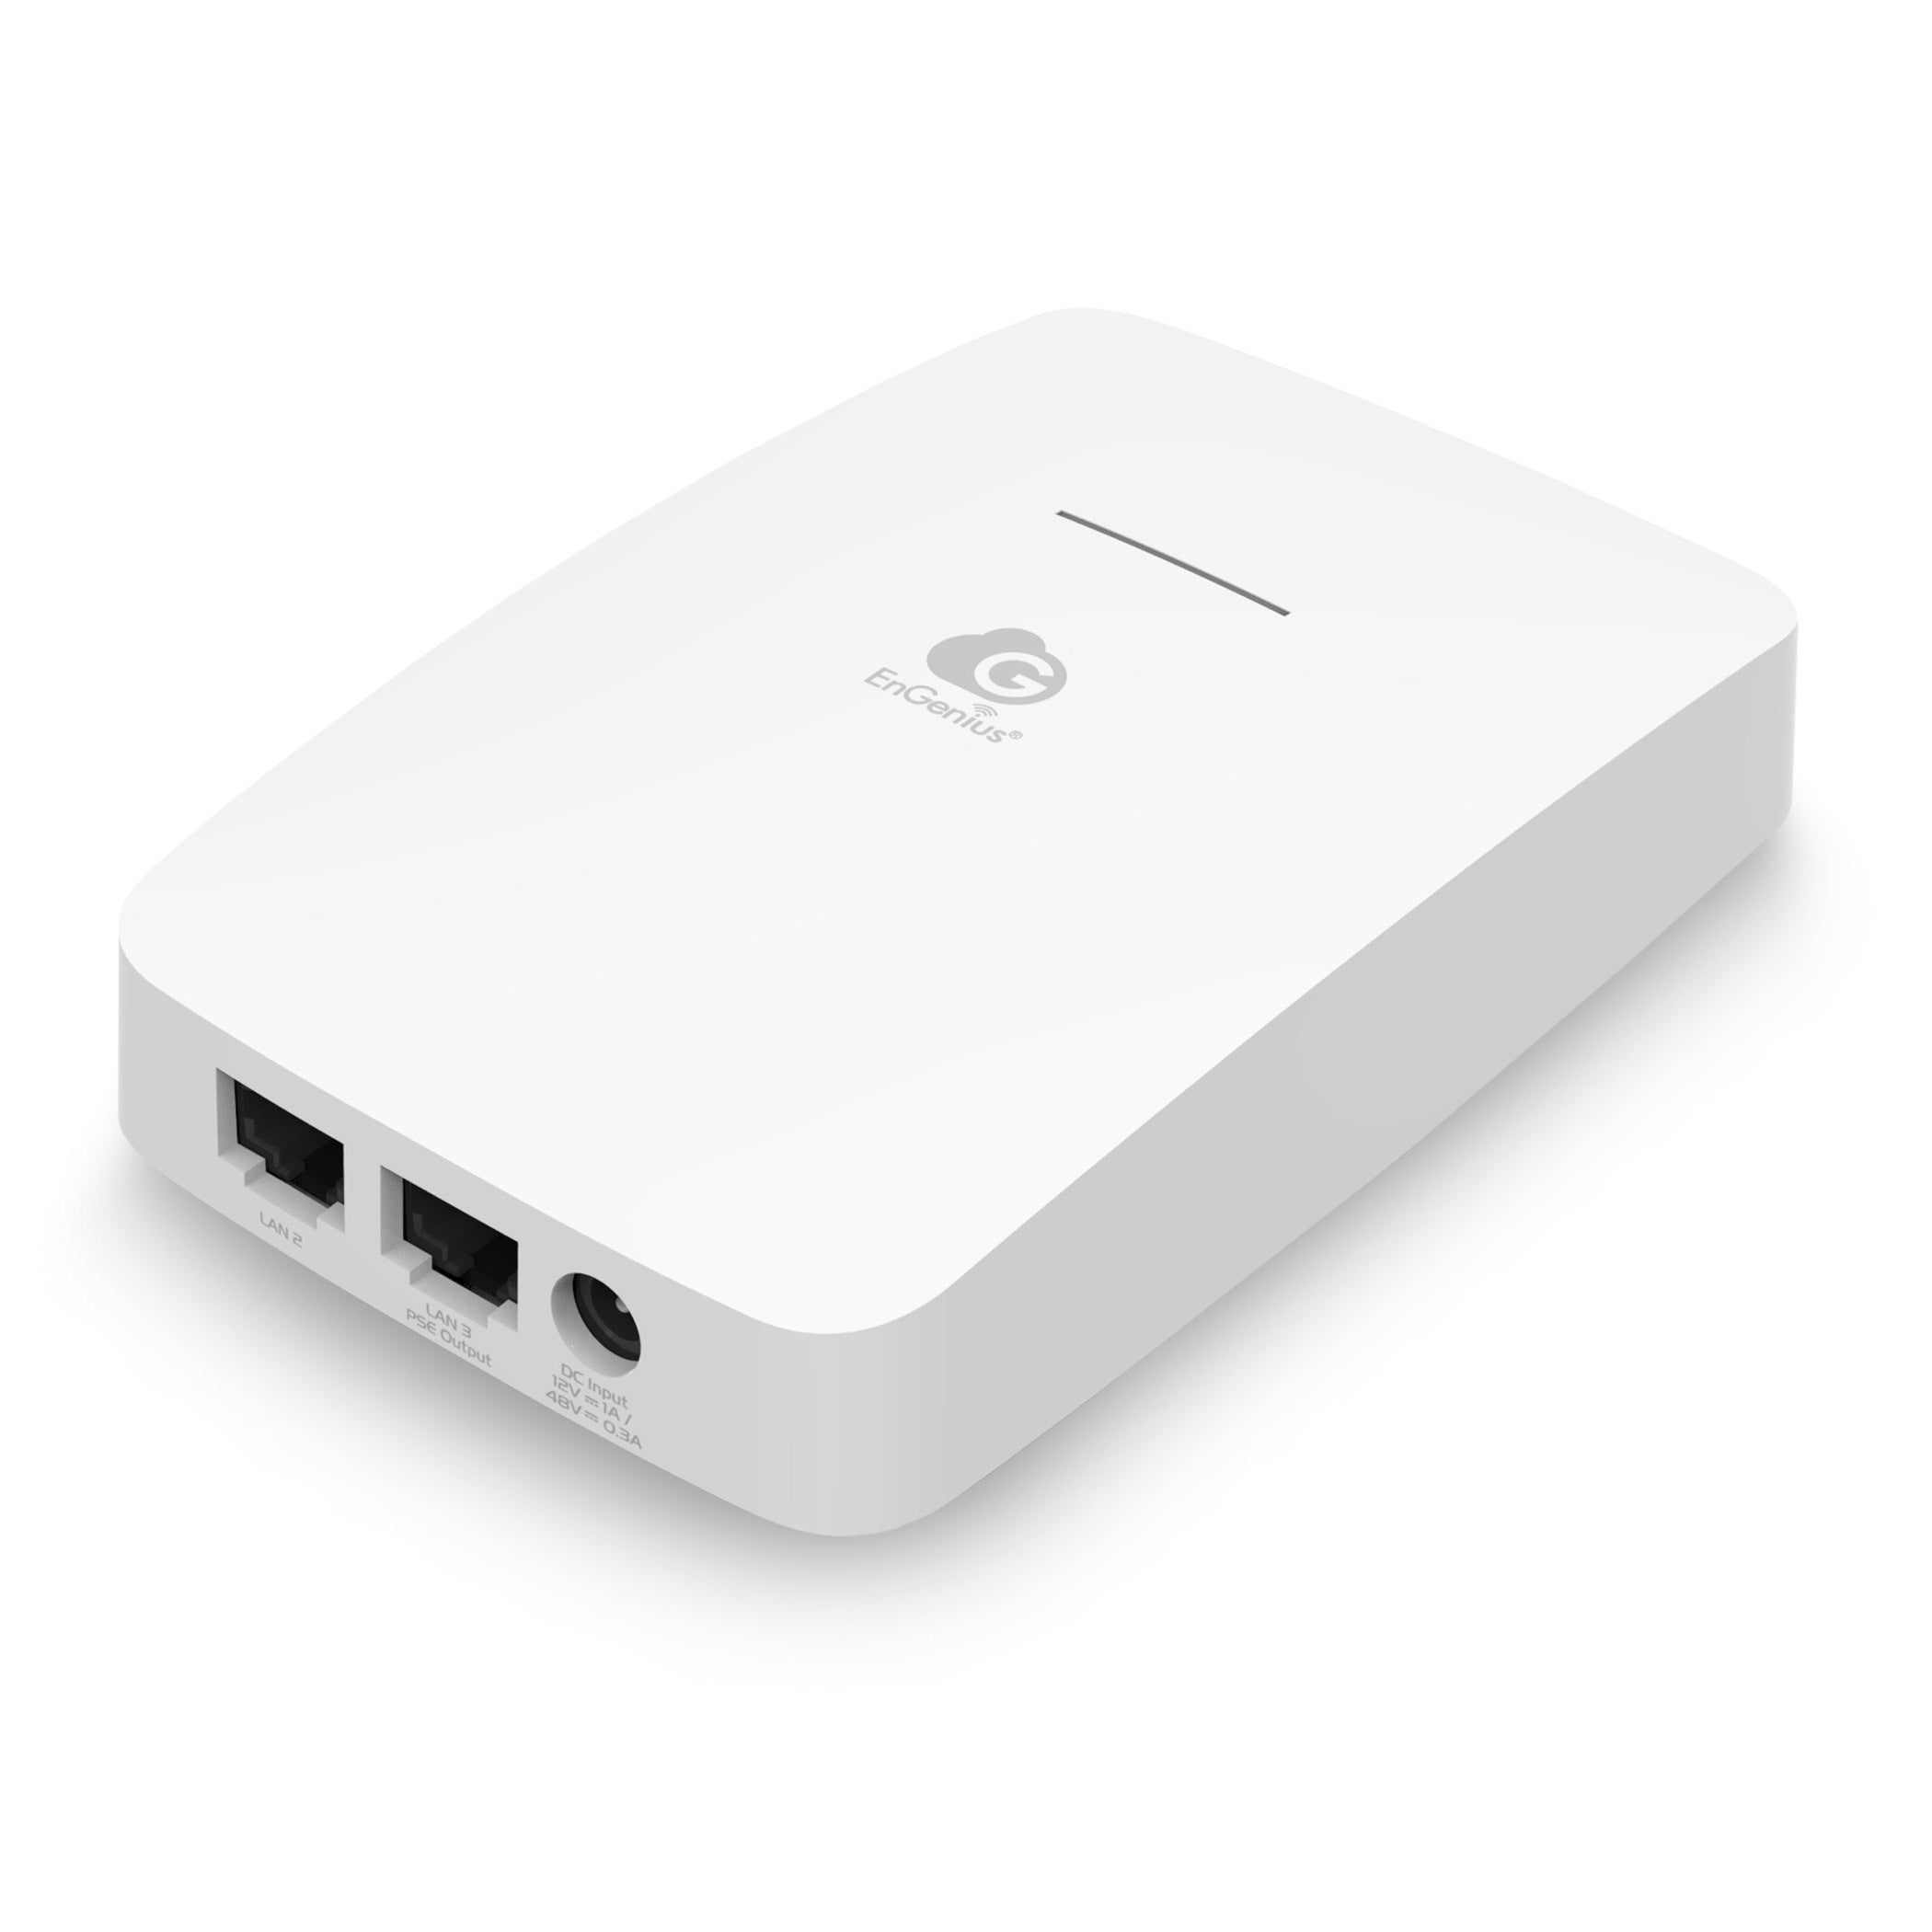 ECW215: Wi-Fi 6 Cloud-Managed Wall Plate Access Point